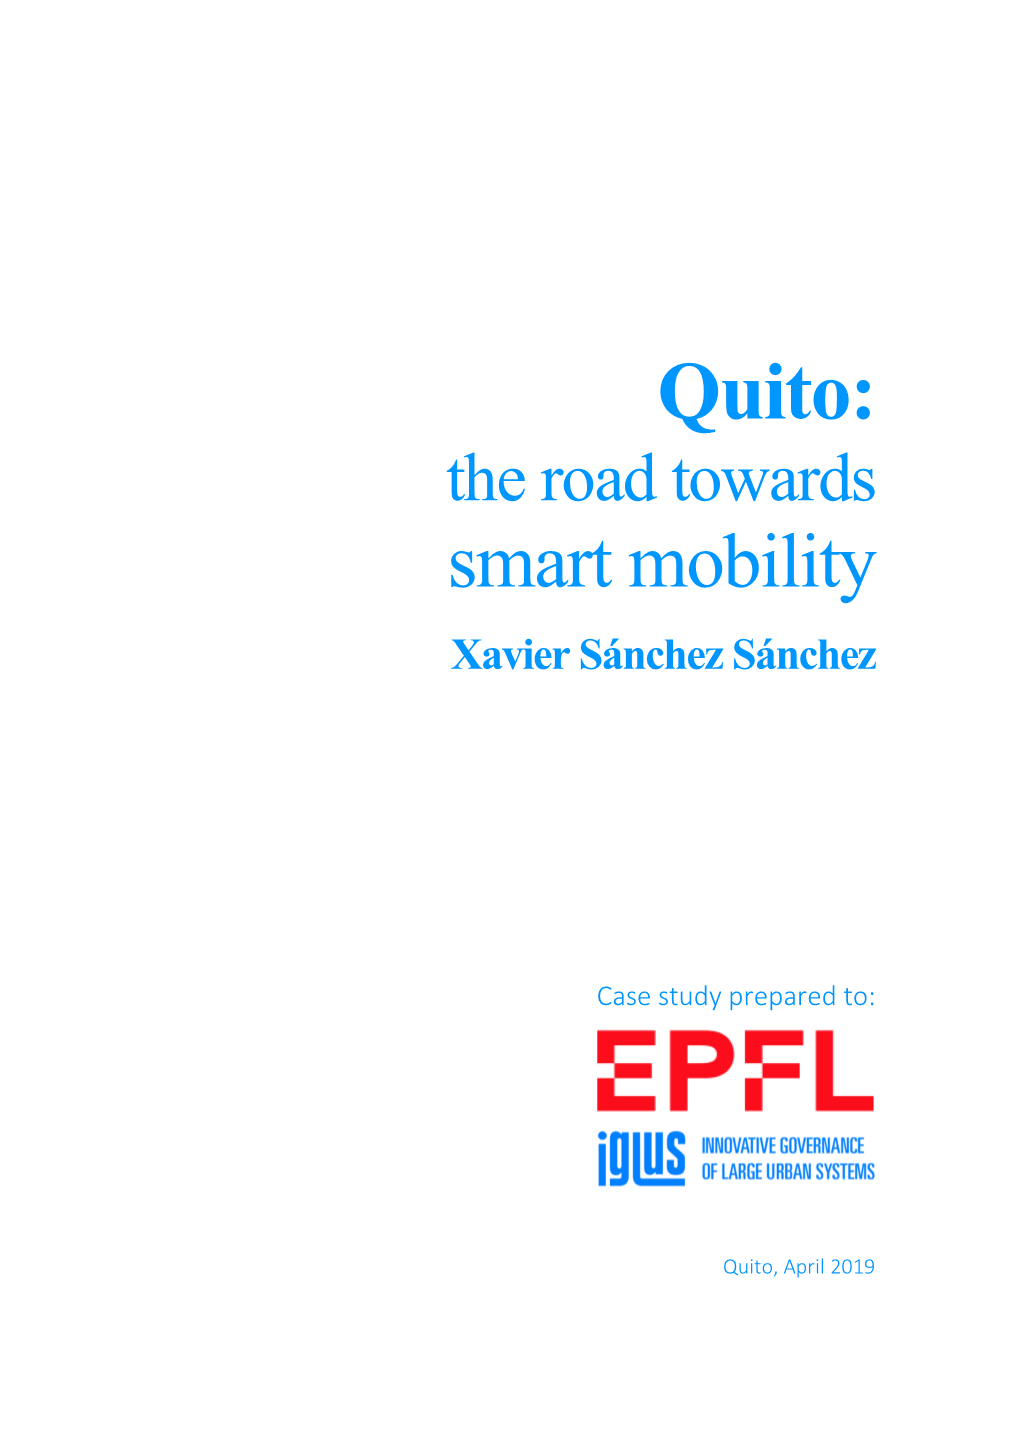 Quito: the Road Towards Smart Mobility